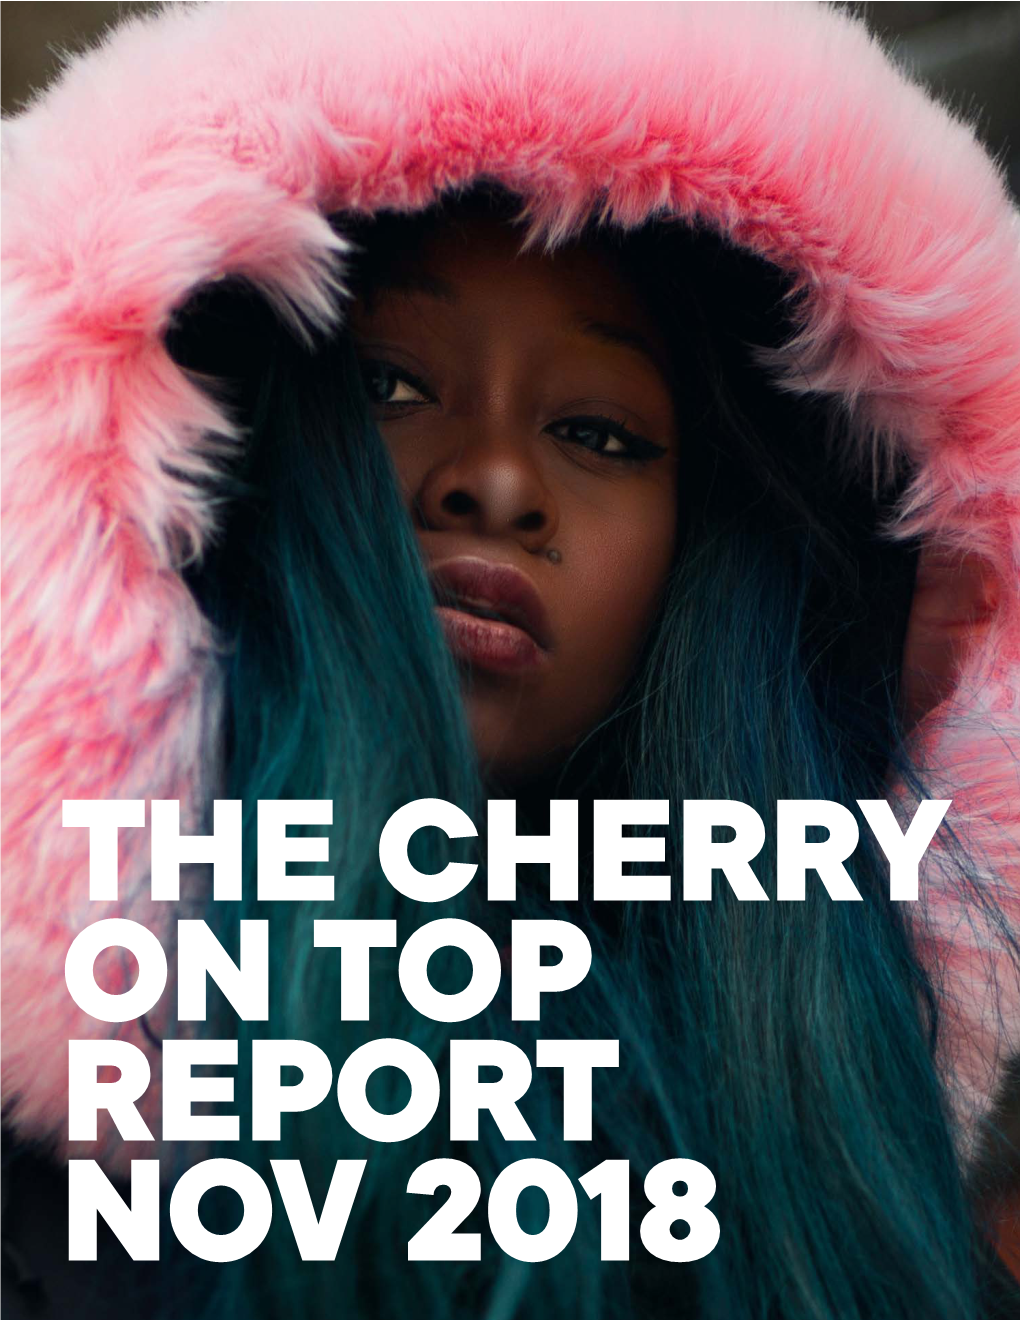 THE CHERRY on TOP REPORT November 2018, Color Cosmetics 10 Cherry Pick’S November 2018 Hot Take